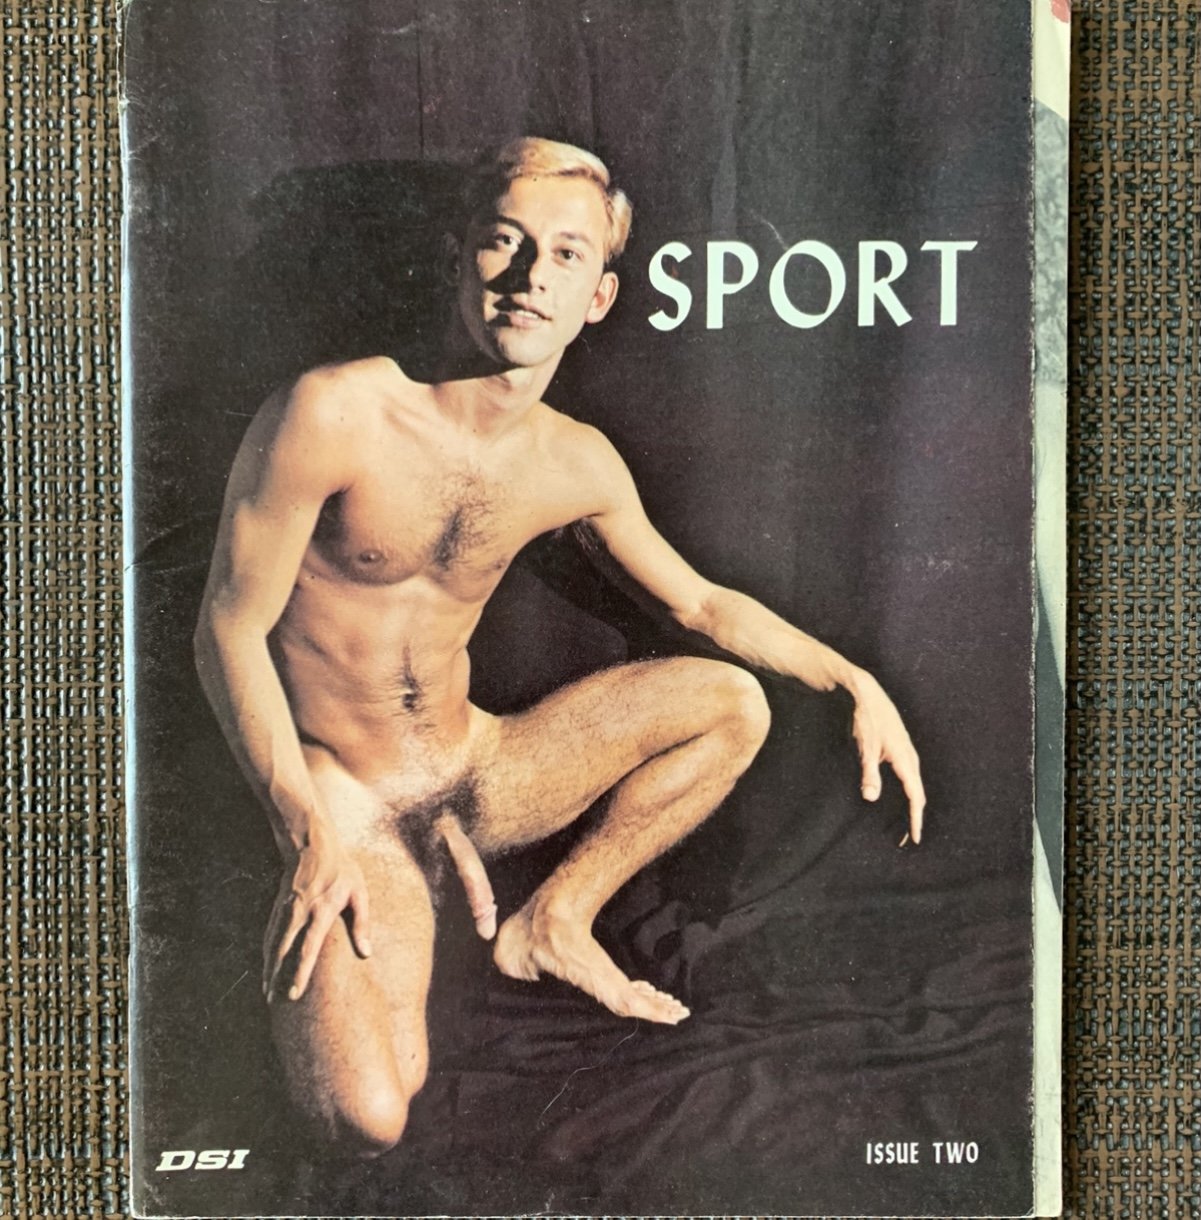 [dead stock] SPORT (1968) DSI Physique Photos Chicken Posing Strap Beefcake Nudes Male Vintage Young